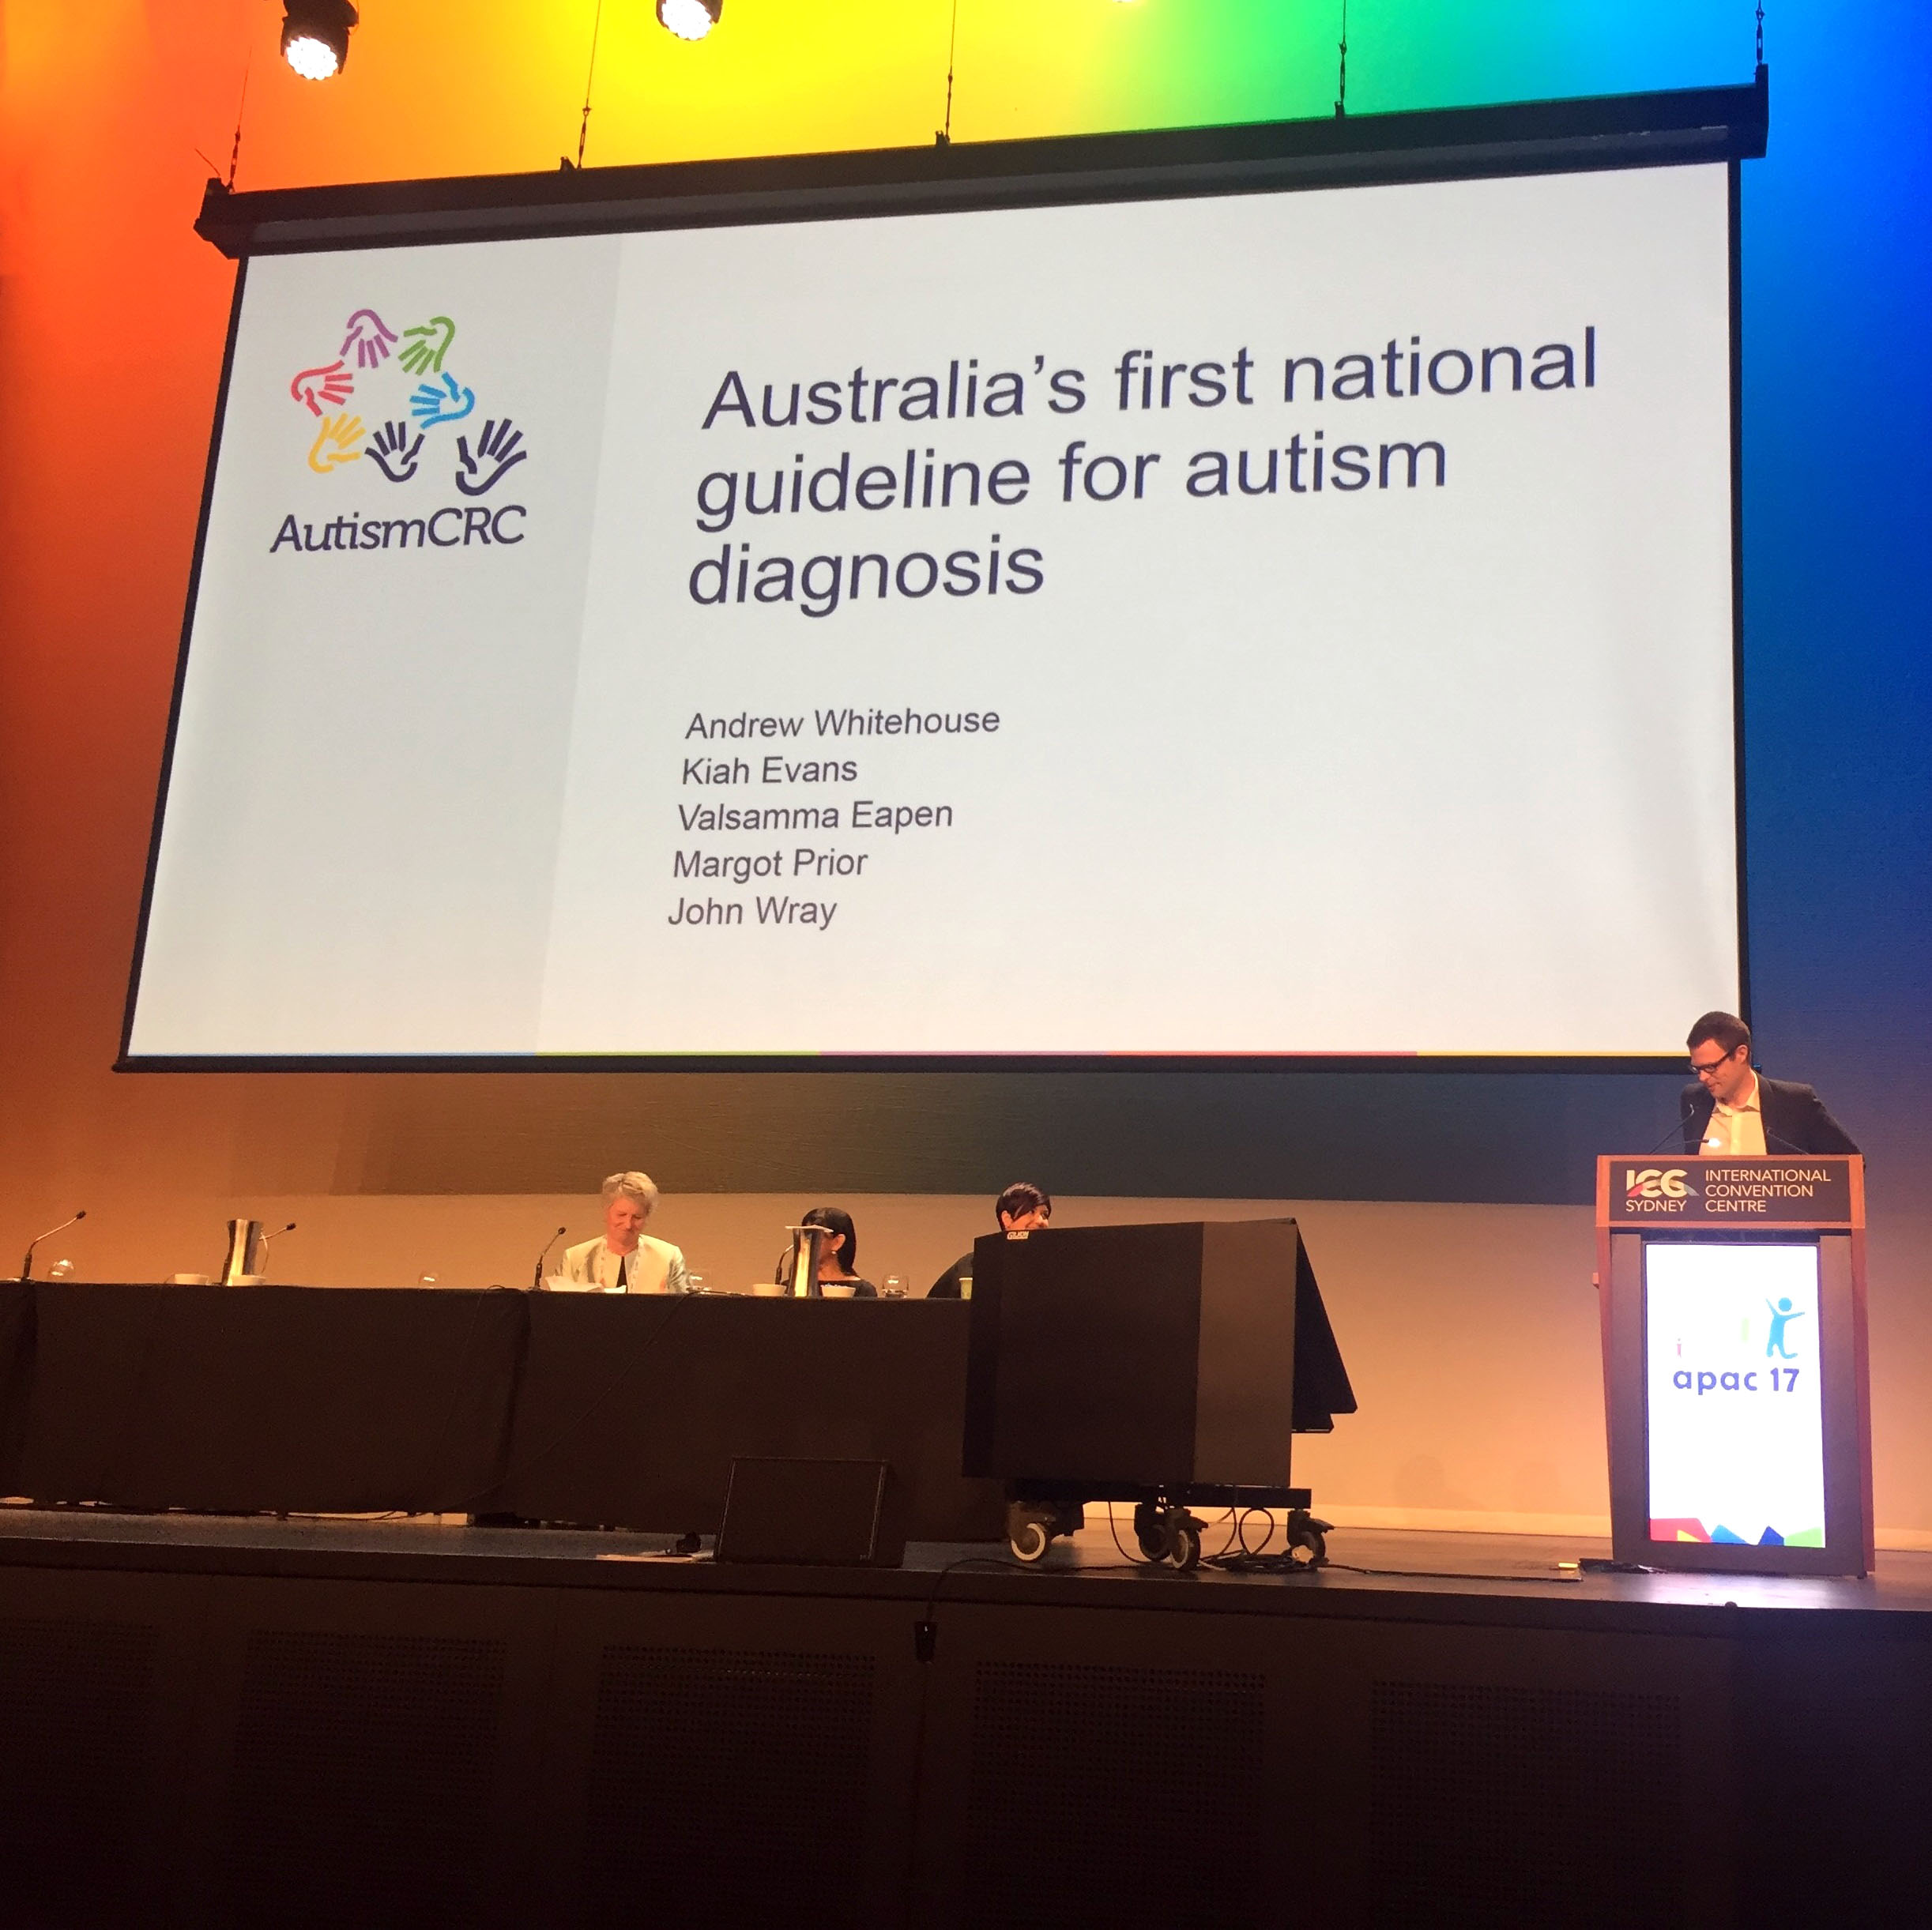 Professor Andrew Whitehouse speaking at the launch of Australia’s first draft national guideline for autism diagnosis